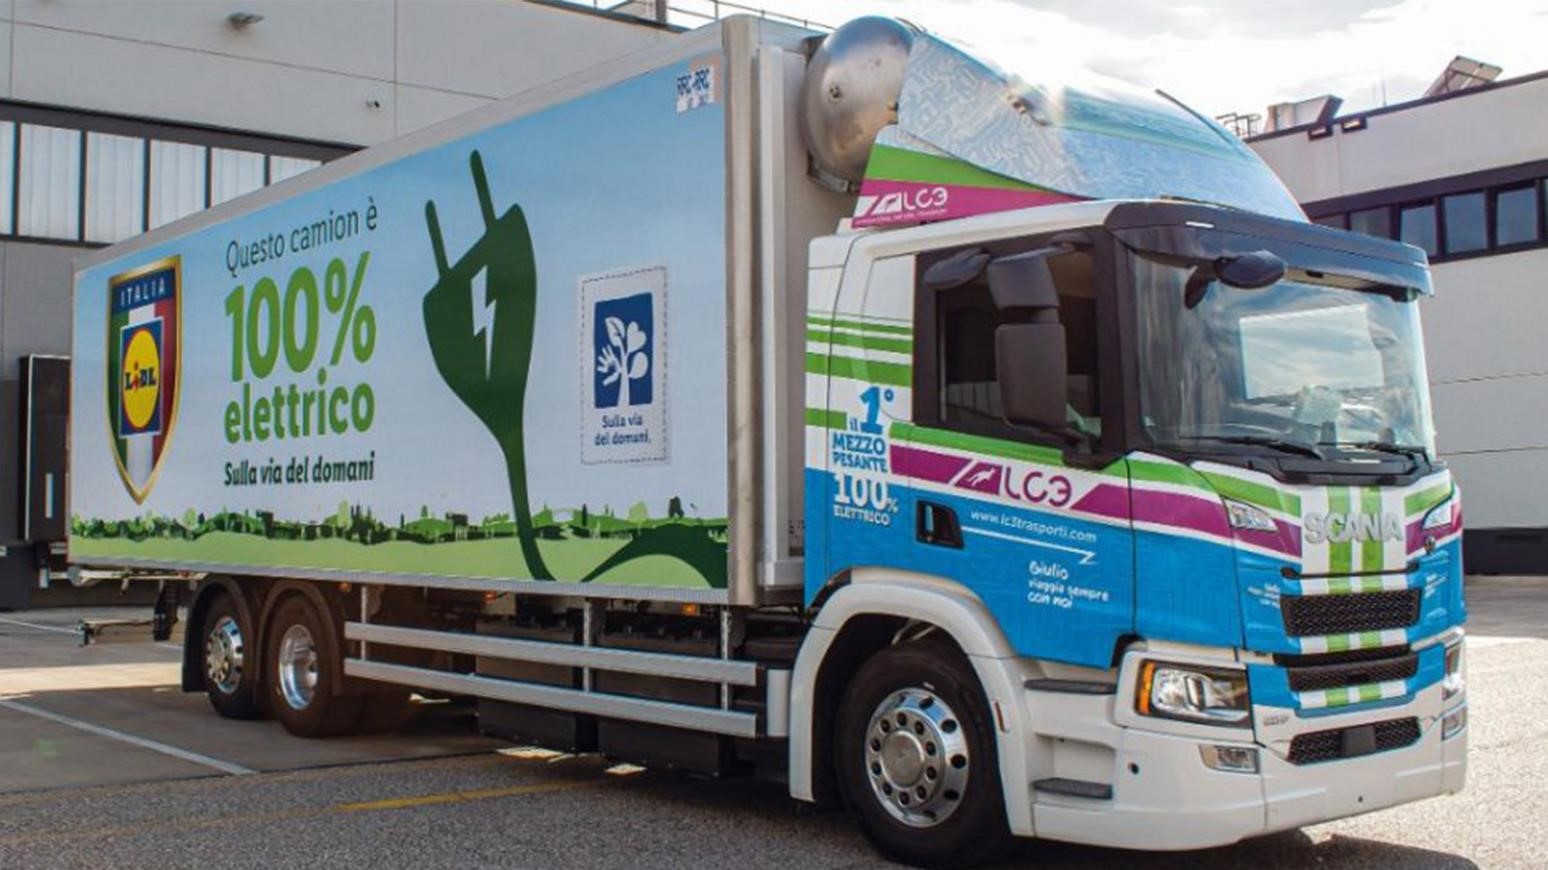 Lidl Italia Chooses Scania For 1st Electric Truck